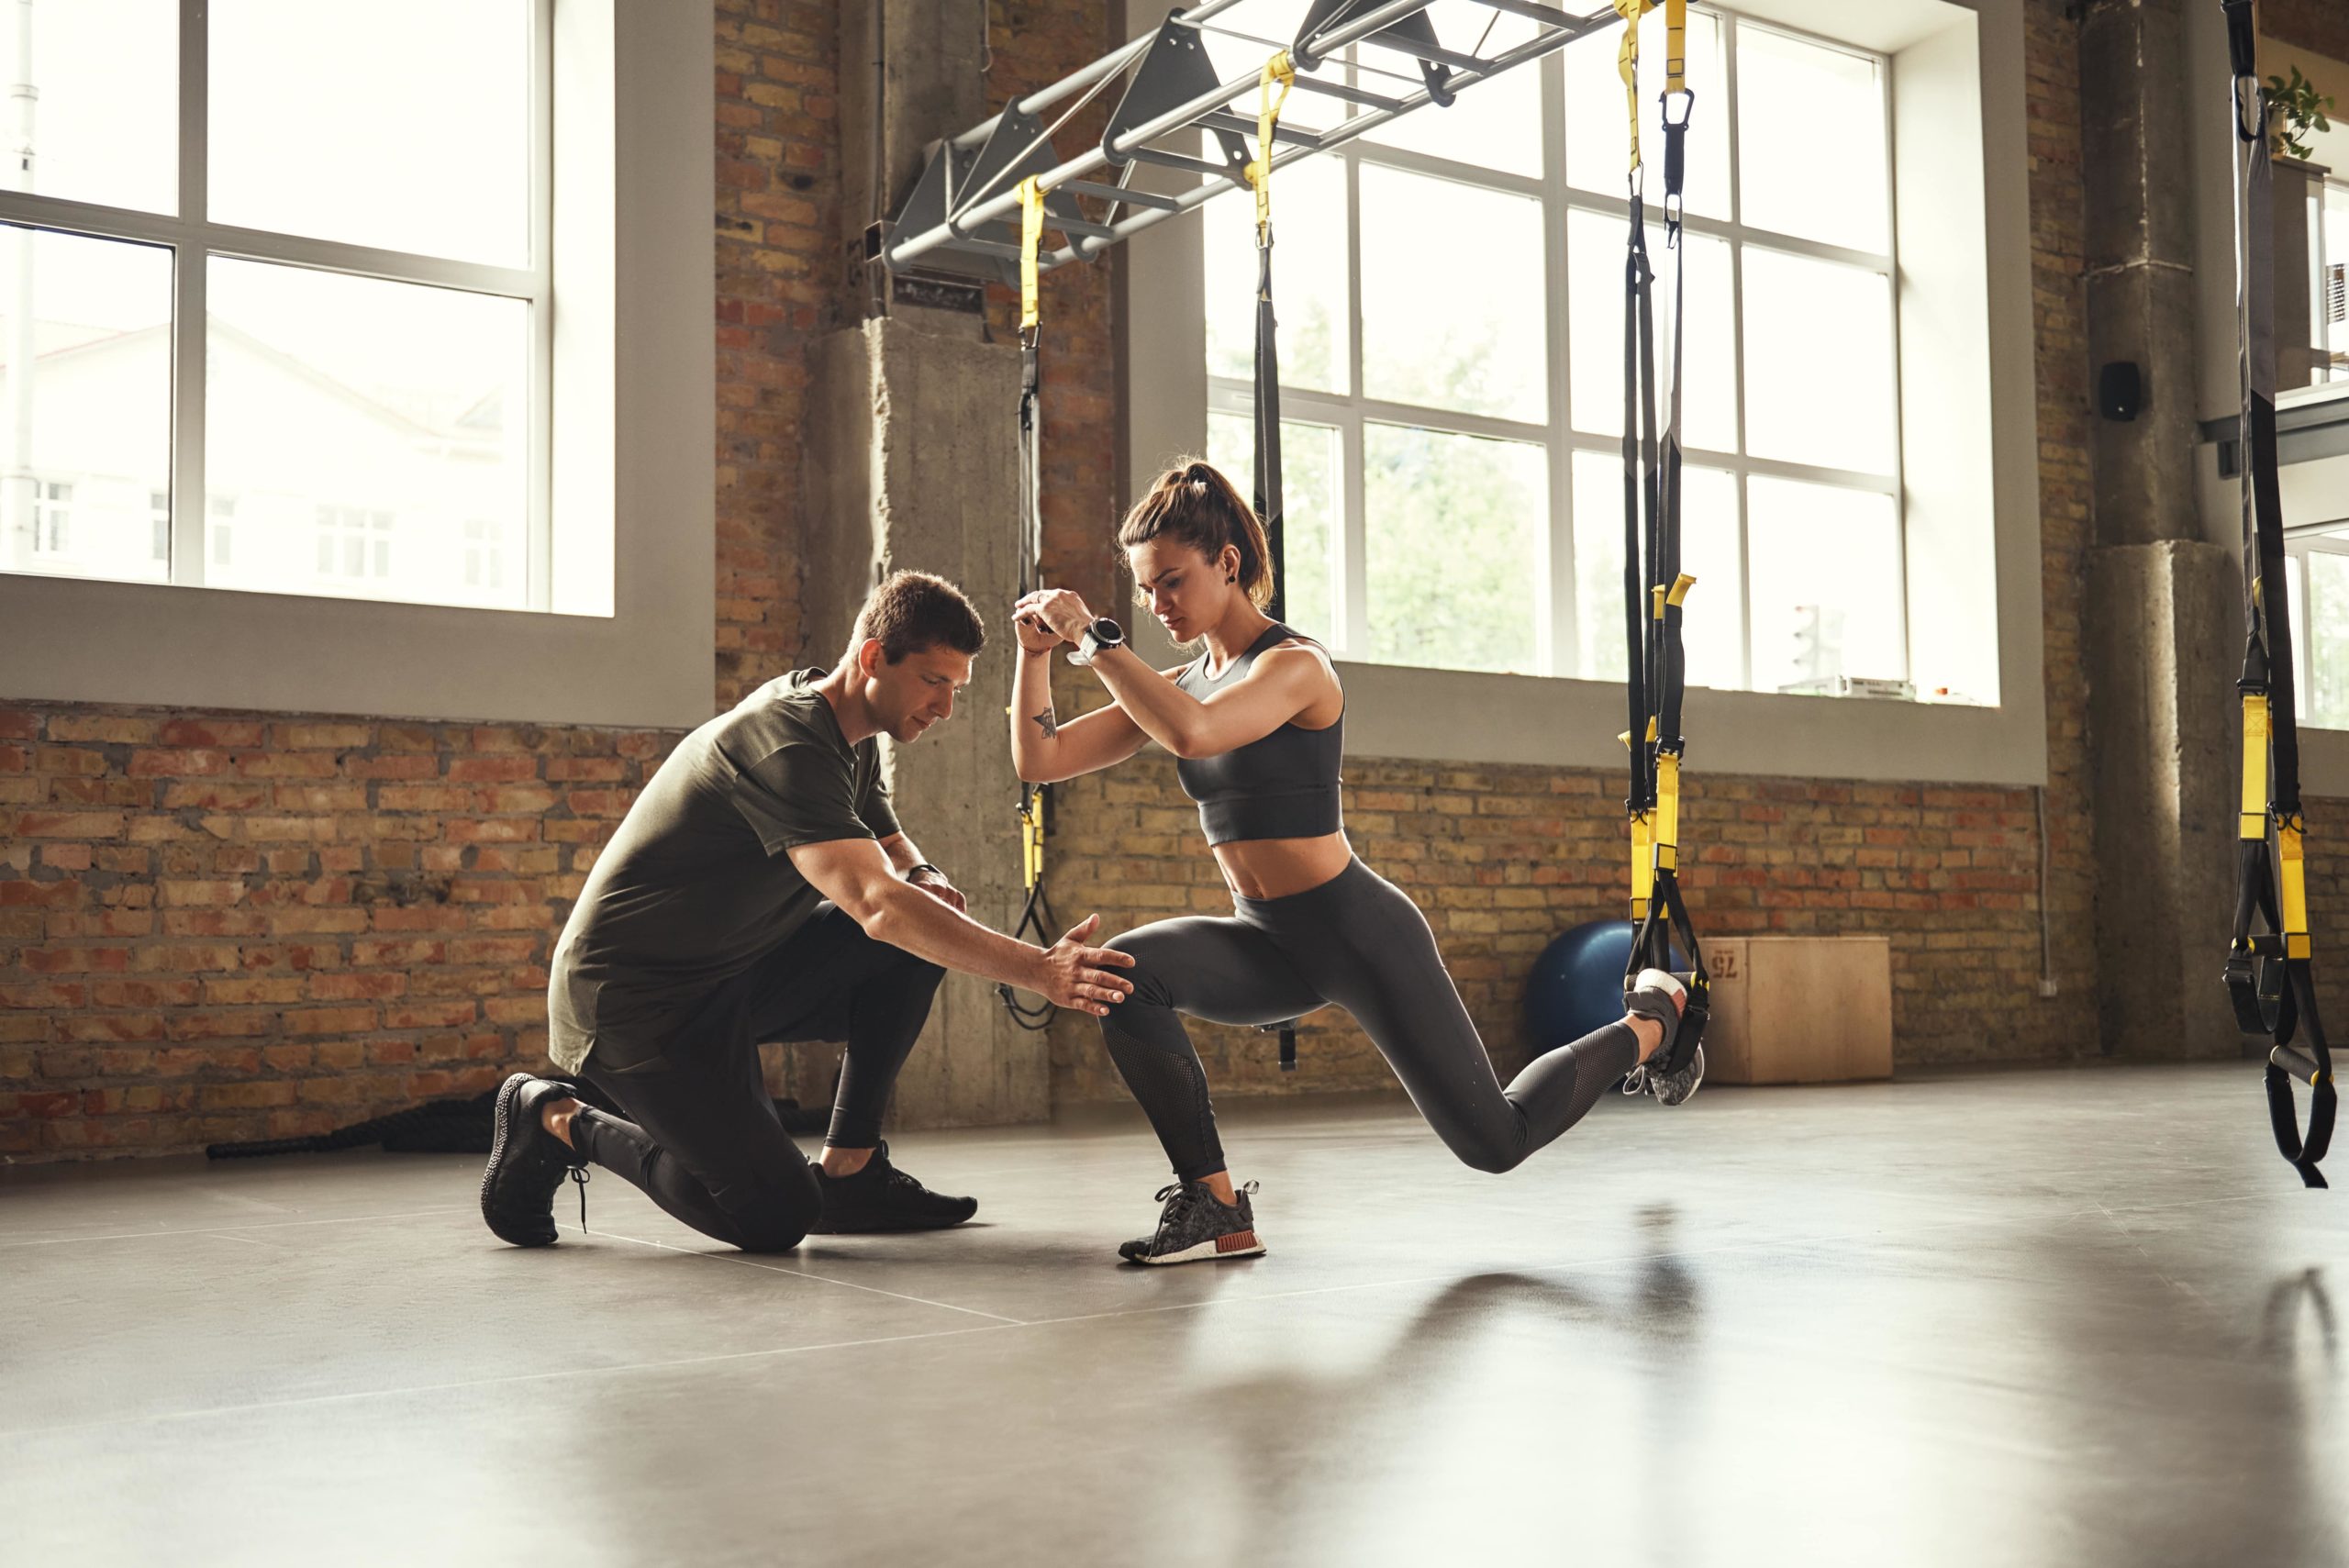 Want Personal Training But Can’t Afford It? Here’s How!